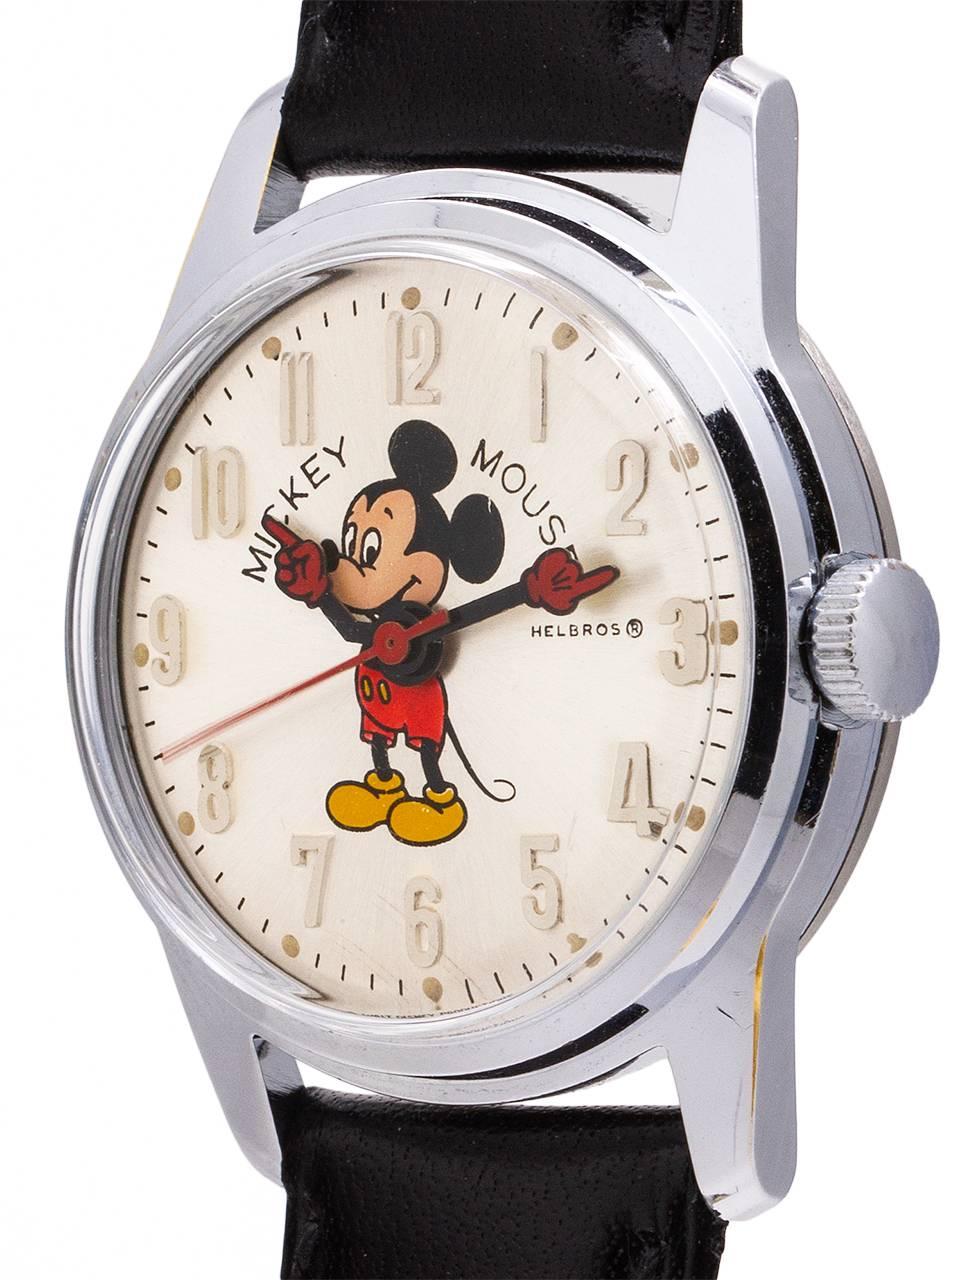 
Vintage medium size Helbros 17 jewel manual wind Mickey Mouse watch circa 1970’s. Featuring 30mm diameter base metal case with steel snap down back, with acrylic crystal, and with excellent condition original dial with polychrome depiction of